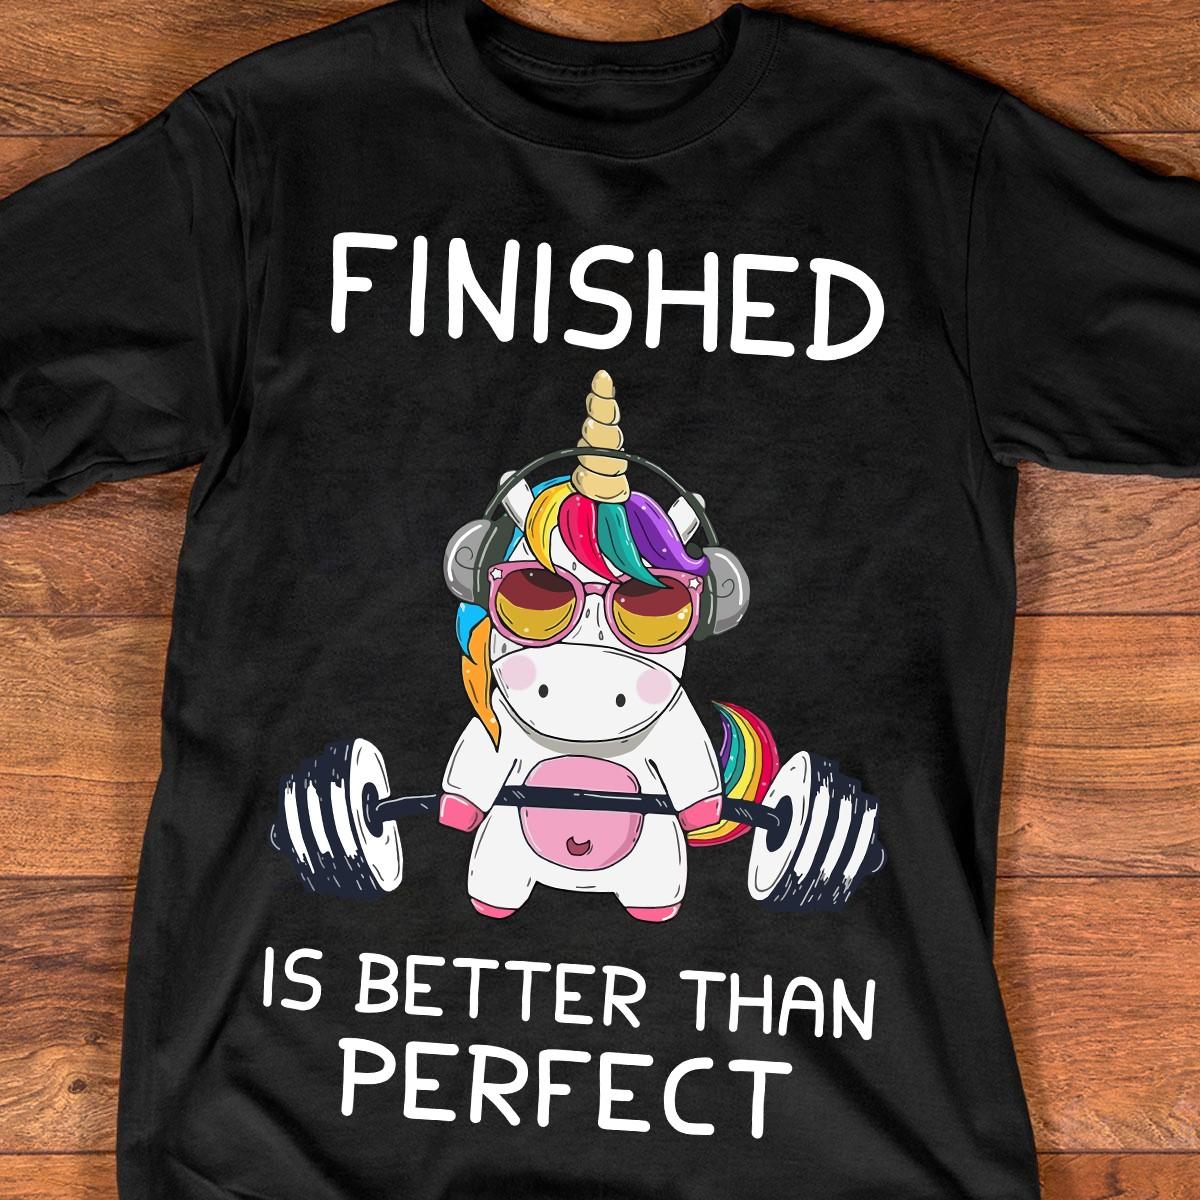 Finished is better than perfect - Unicorn lifting, lifting and music, lifting heavy iron